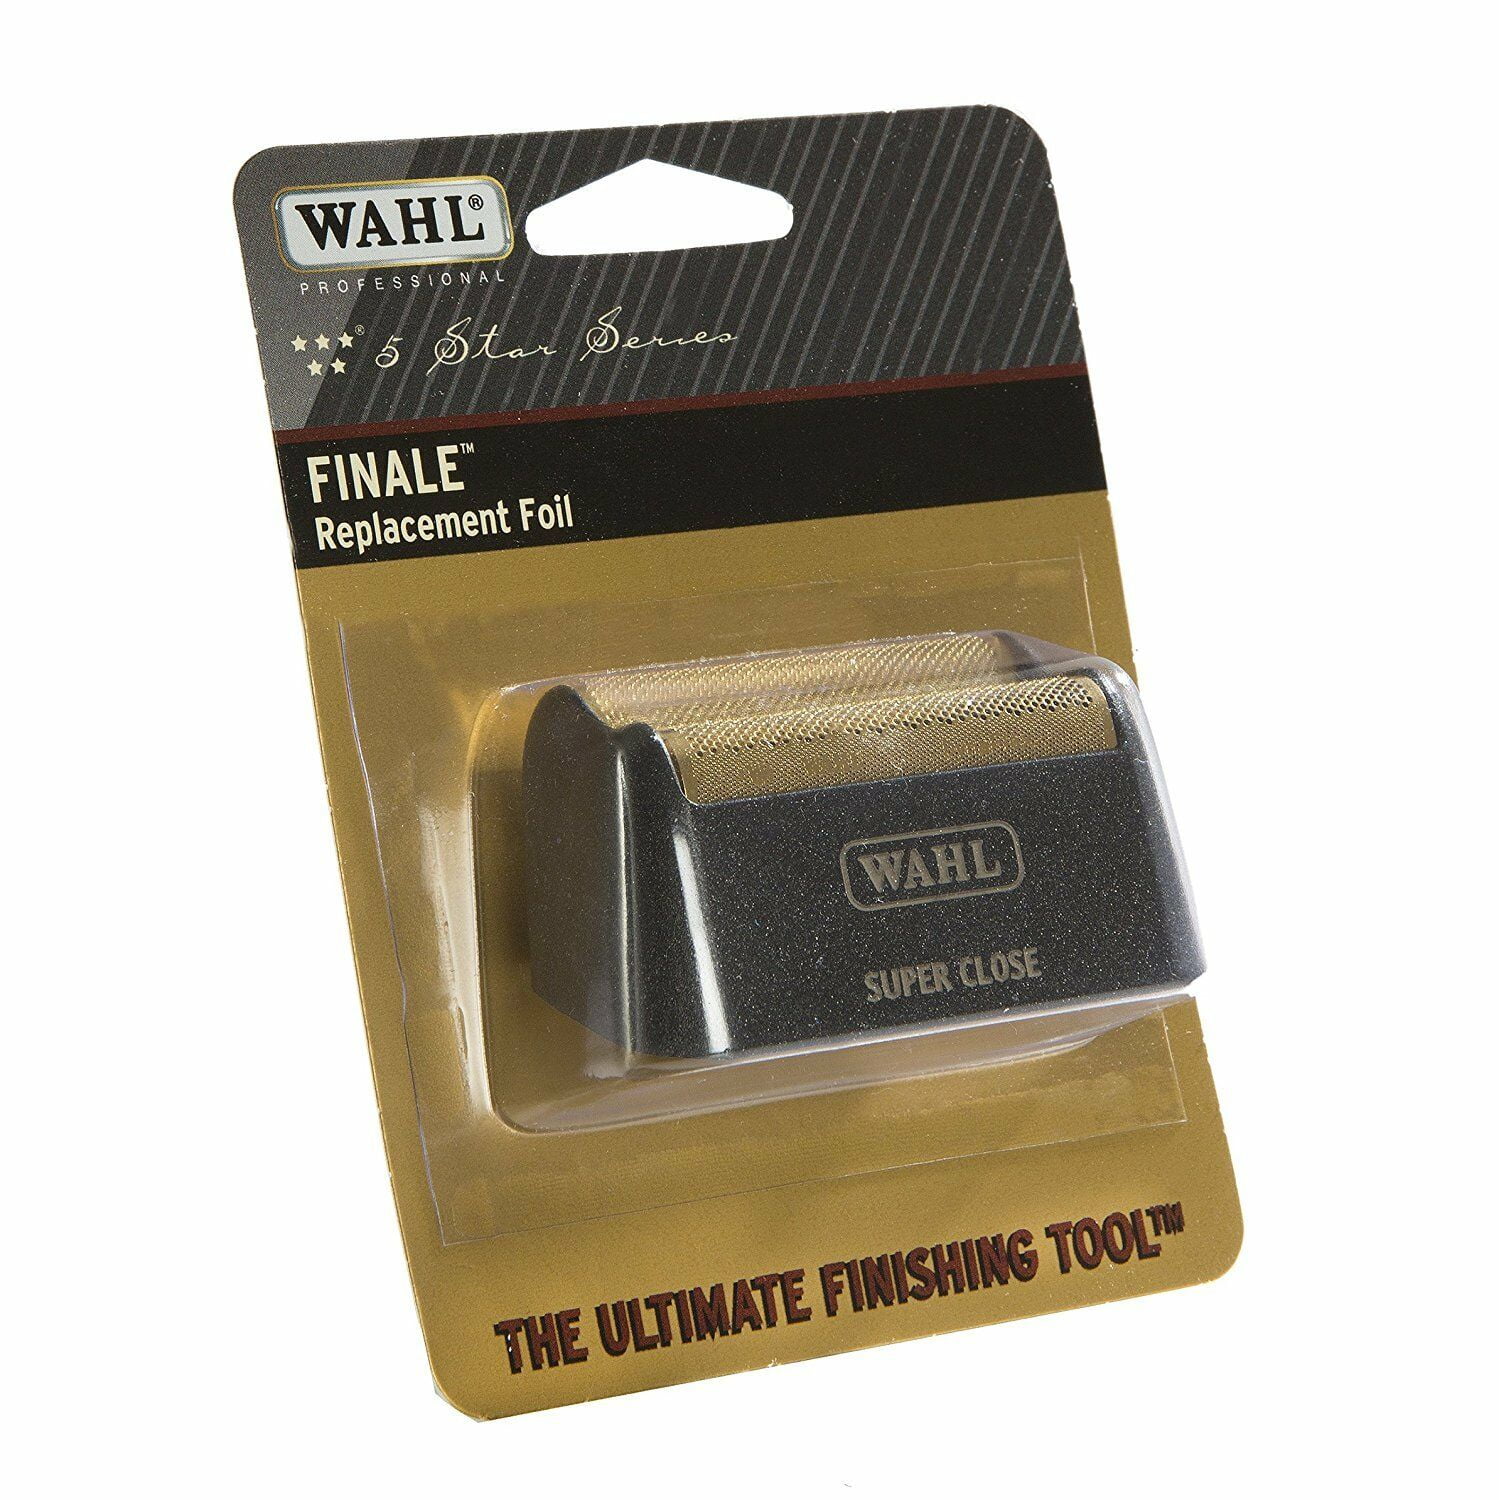 wahl 5 star shaver replacement foil sally's